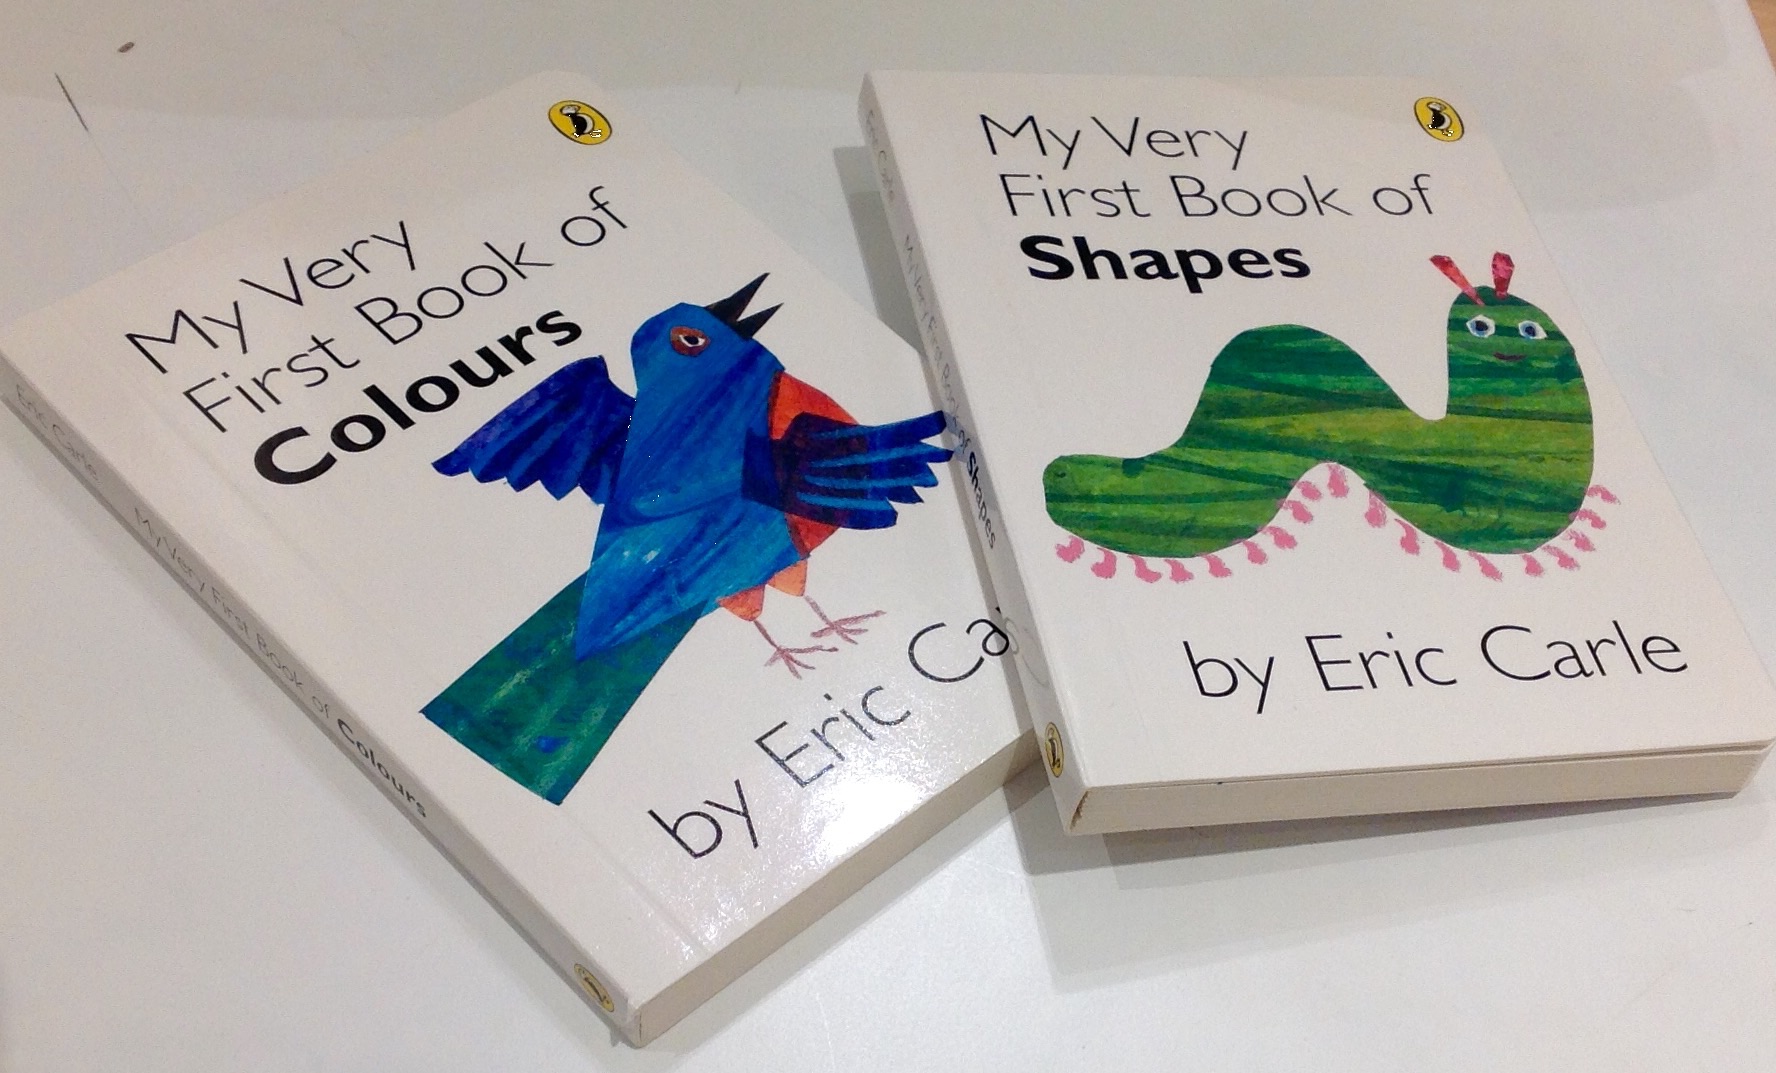 cocuklar-icin-kitap-onerileri-my-very-first-book-of-colours-shapes-by-eric-carle-0-yas-ve-uzeri